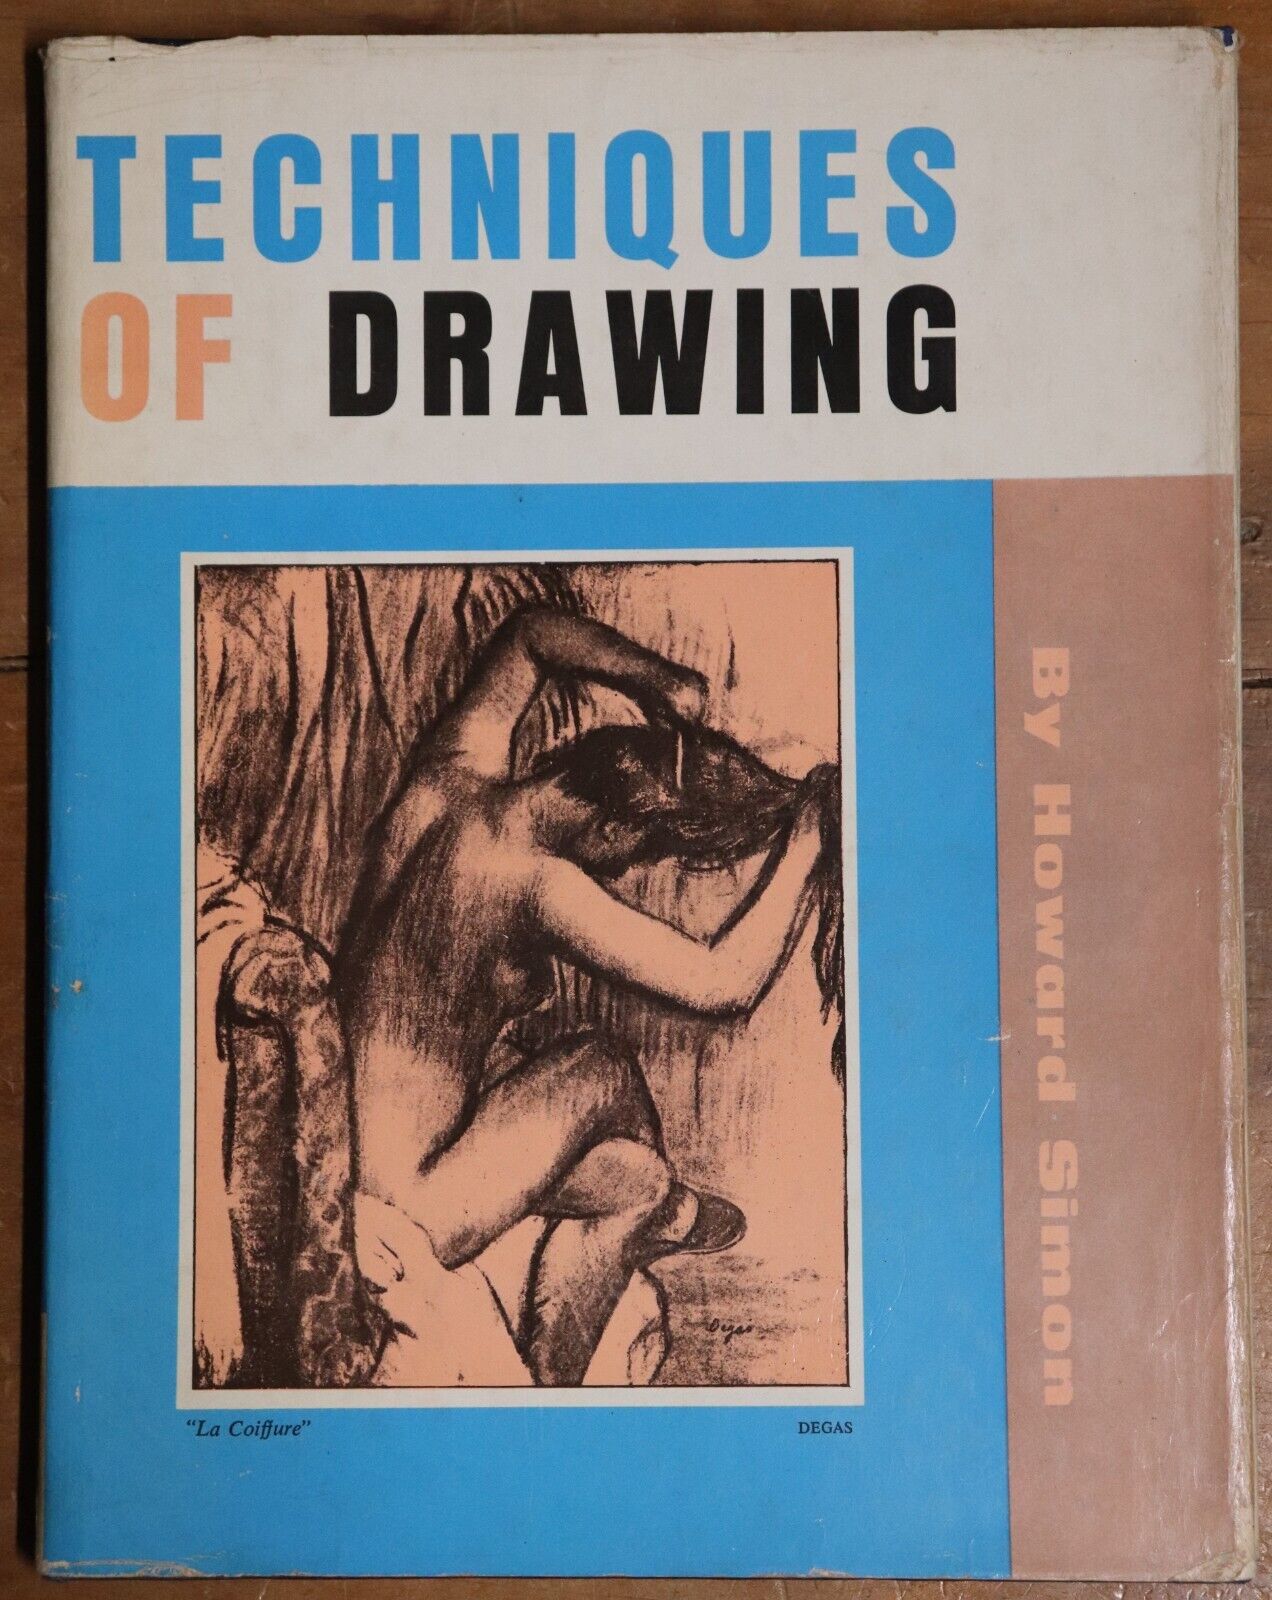 Techniques Of Drawing by Howard Simon - 1963 - Vintage Art Tutorial Book